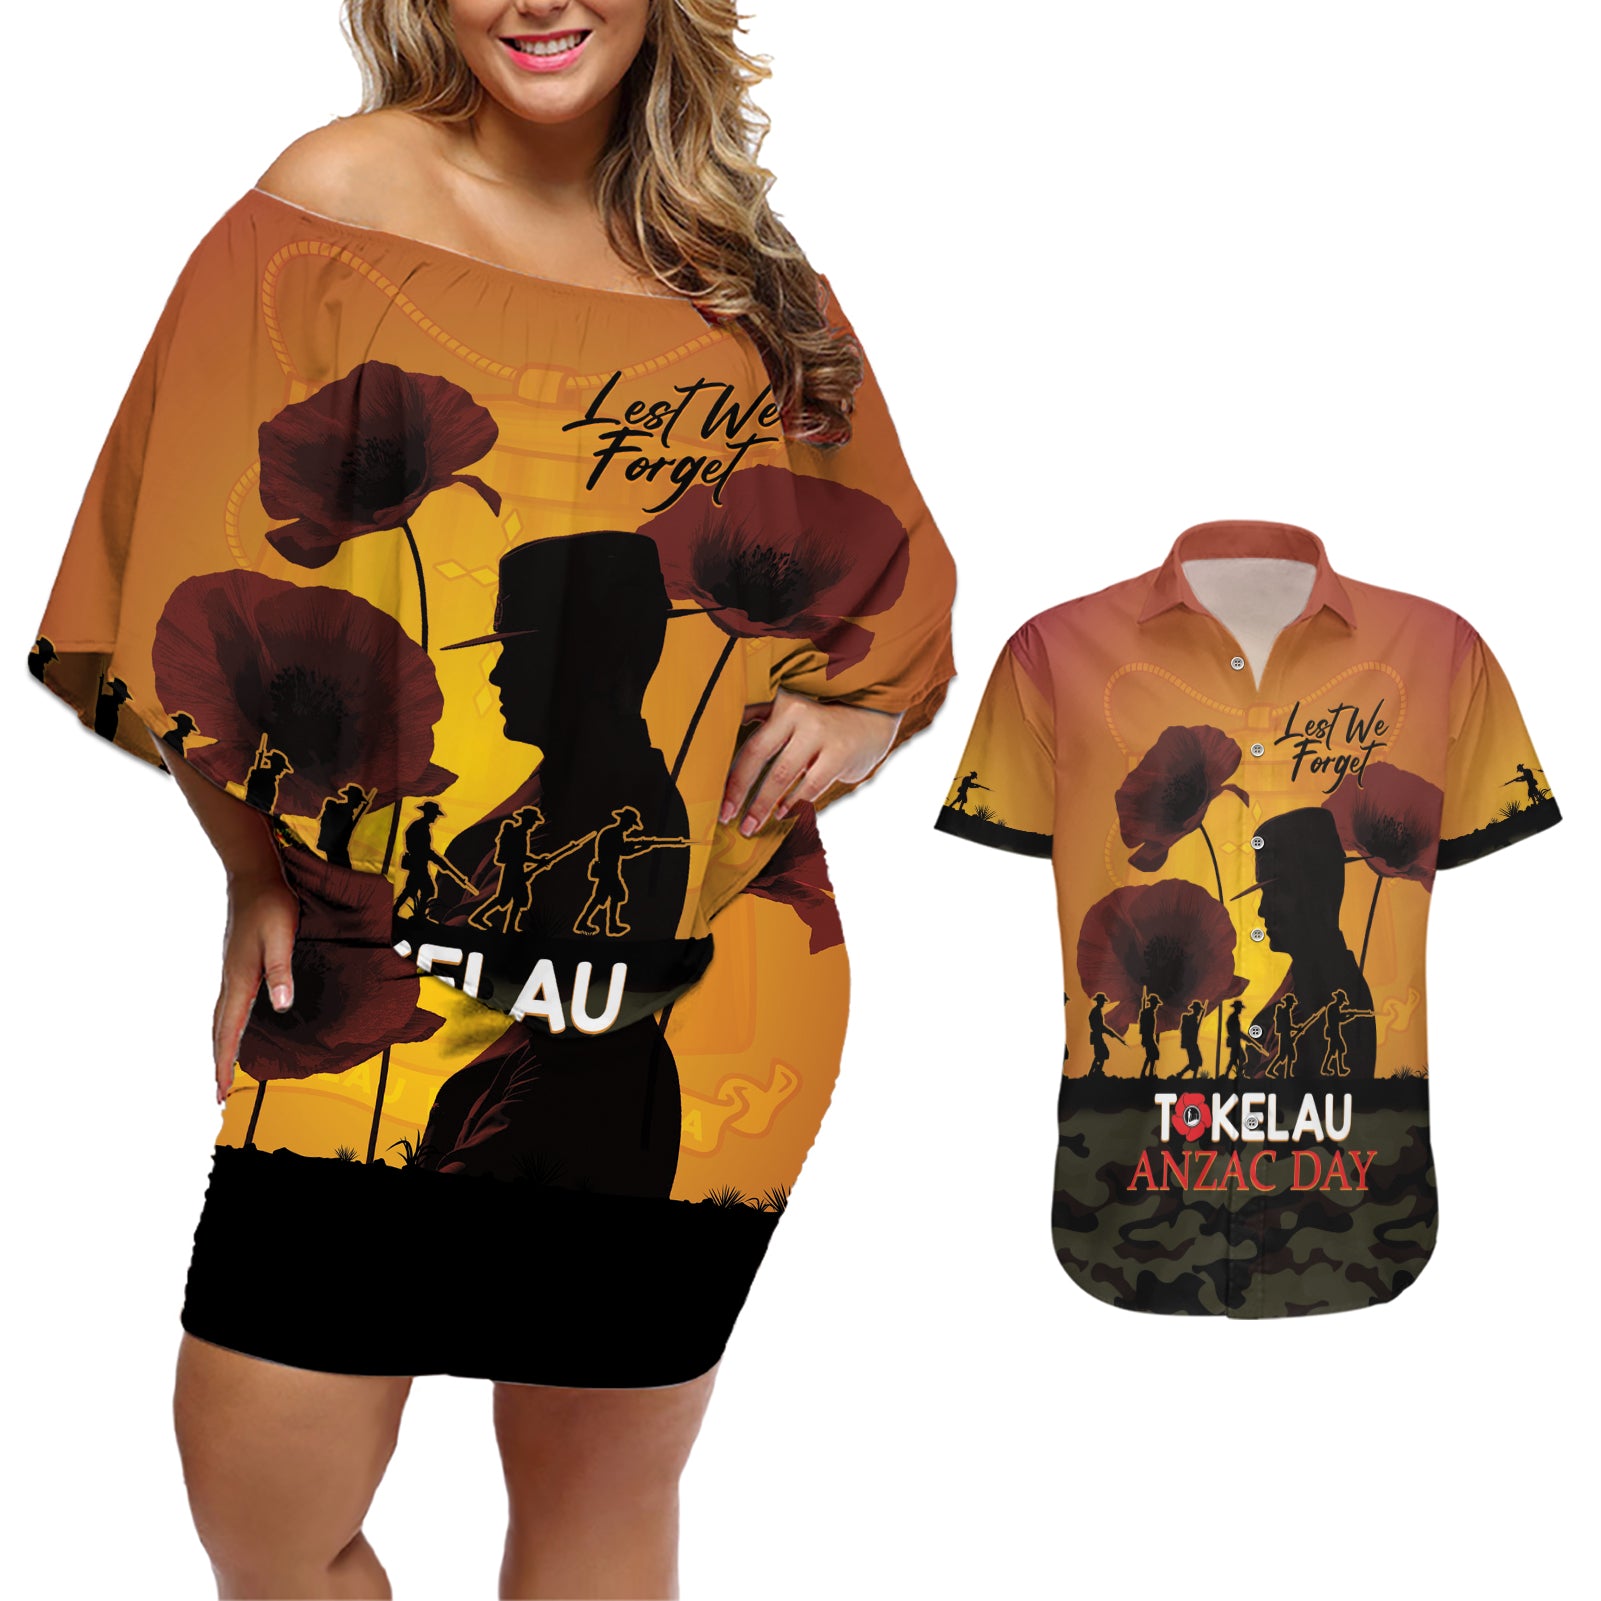 Tokelau ANZAC Day Couples Matching Off Shoulder Short Dress and Hawaiian Shirt Camouflage With Poppies Lest We Forget LT14 Yellow - Polynesian Pride